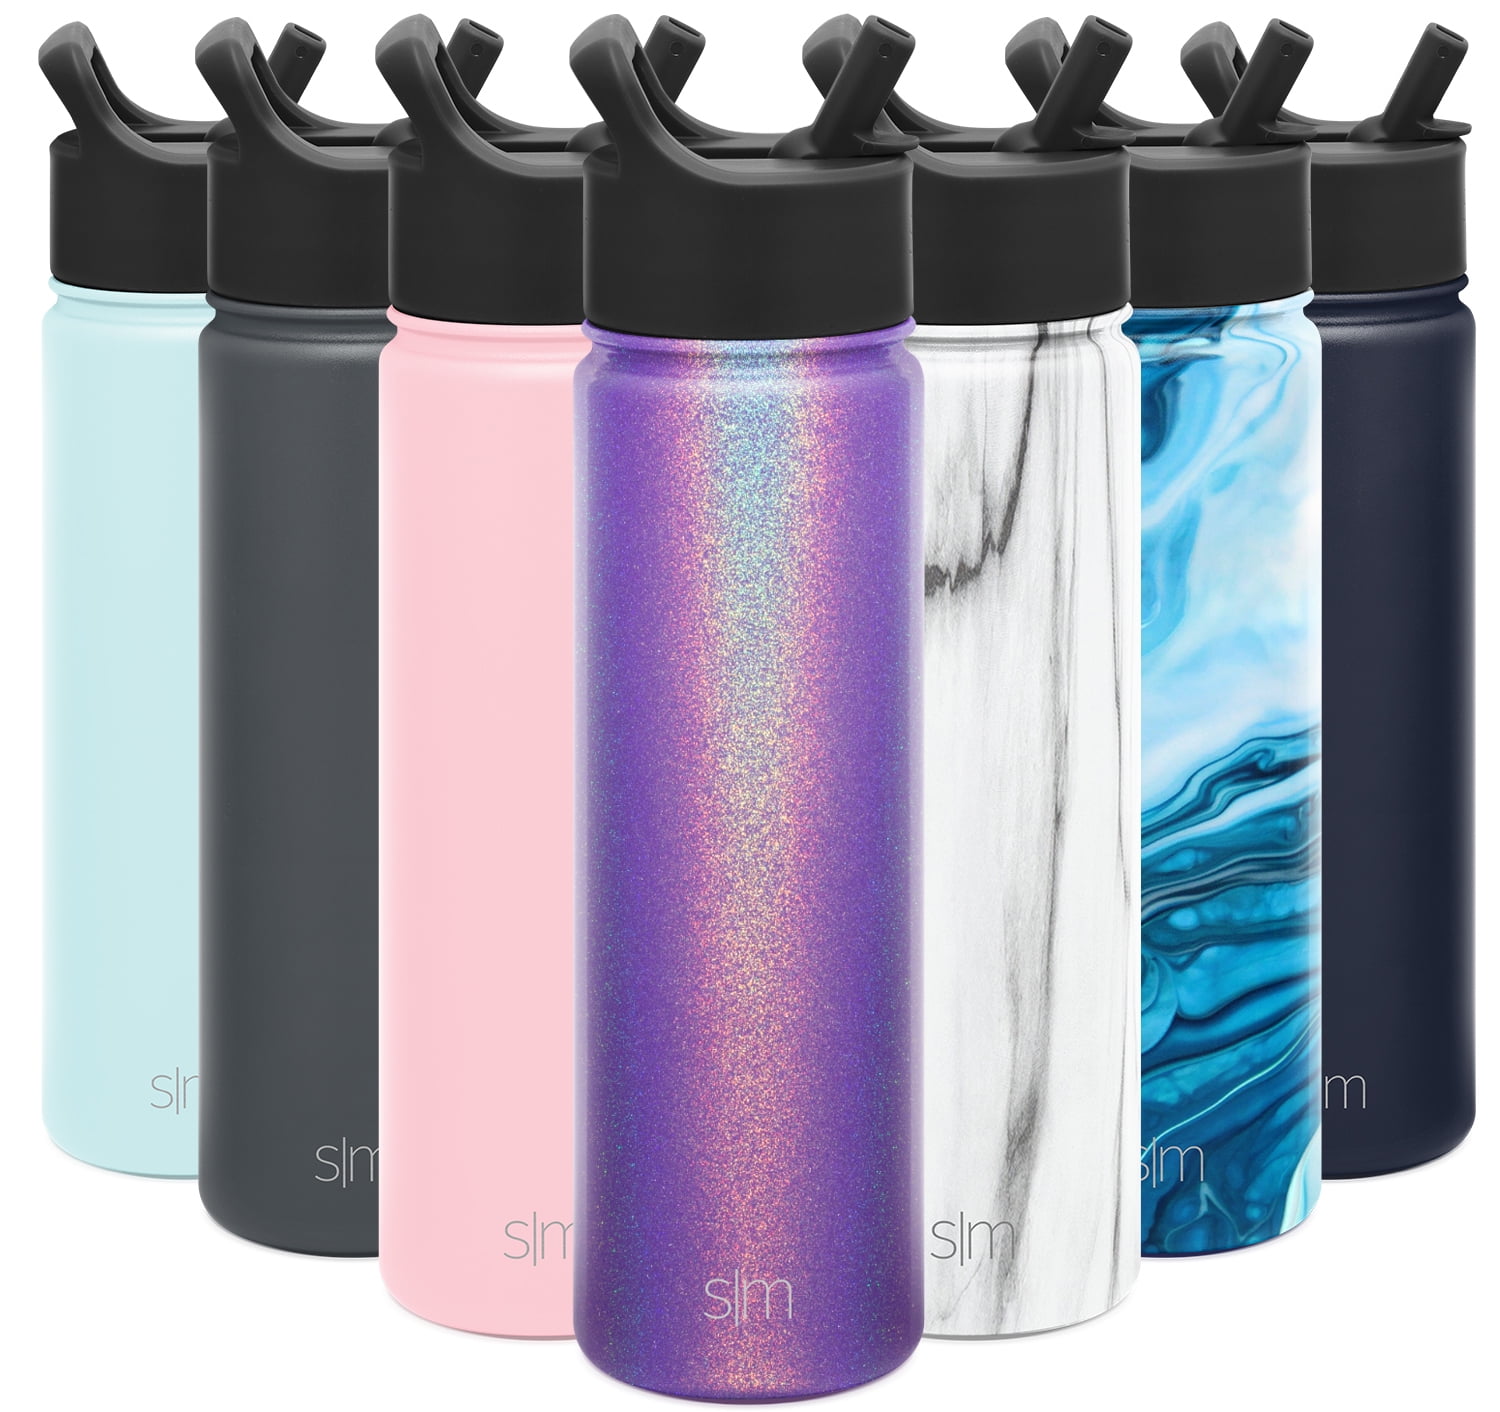  Simple Modern Insulated Straw Lid - Fits All Summit and Hydro  Flask Wide Mouth Water Bottle Sizes - Insulated Splash Proof Cap for 10,  12, 14, 16, 18, 20, 22, 24, 32, 40, 64 & 84 oz - Midnight Black : Appliances